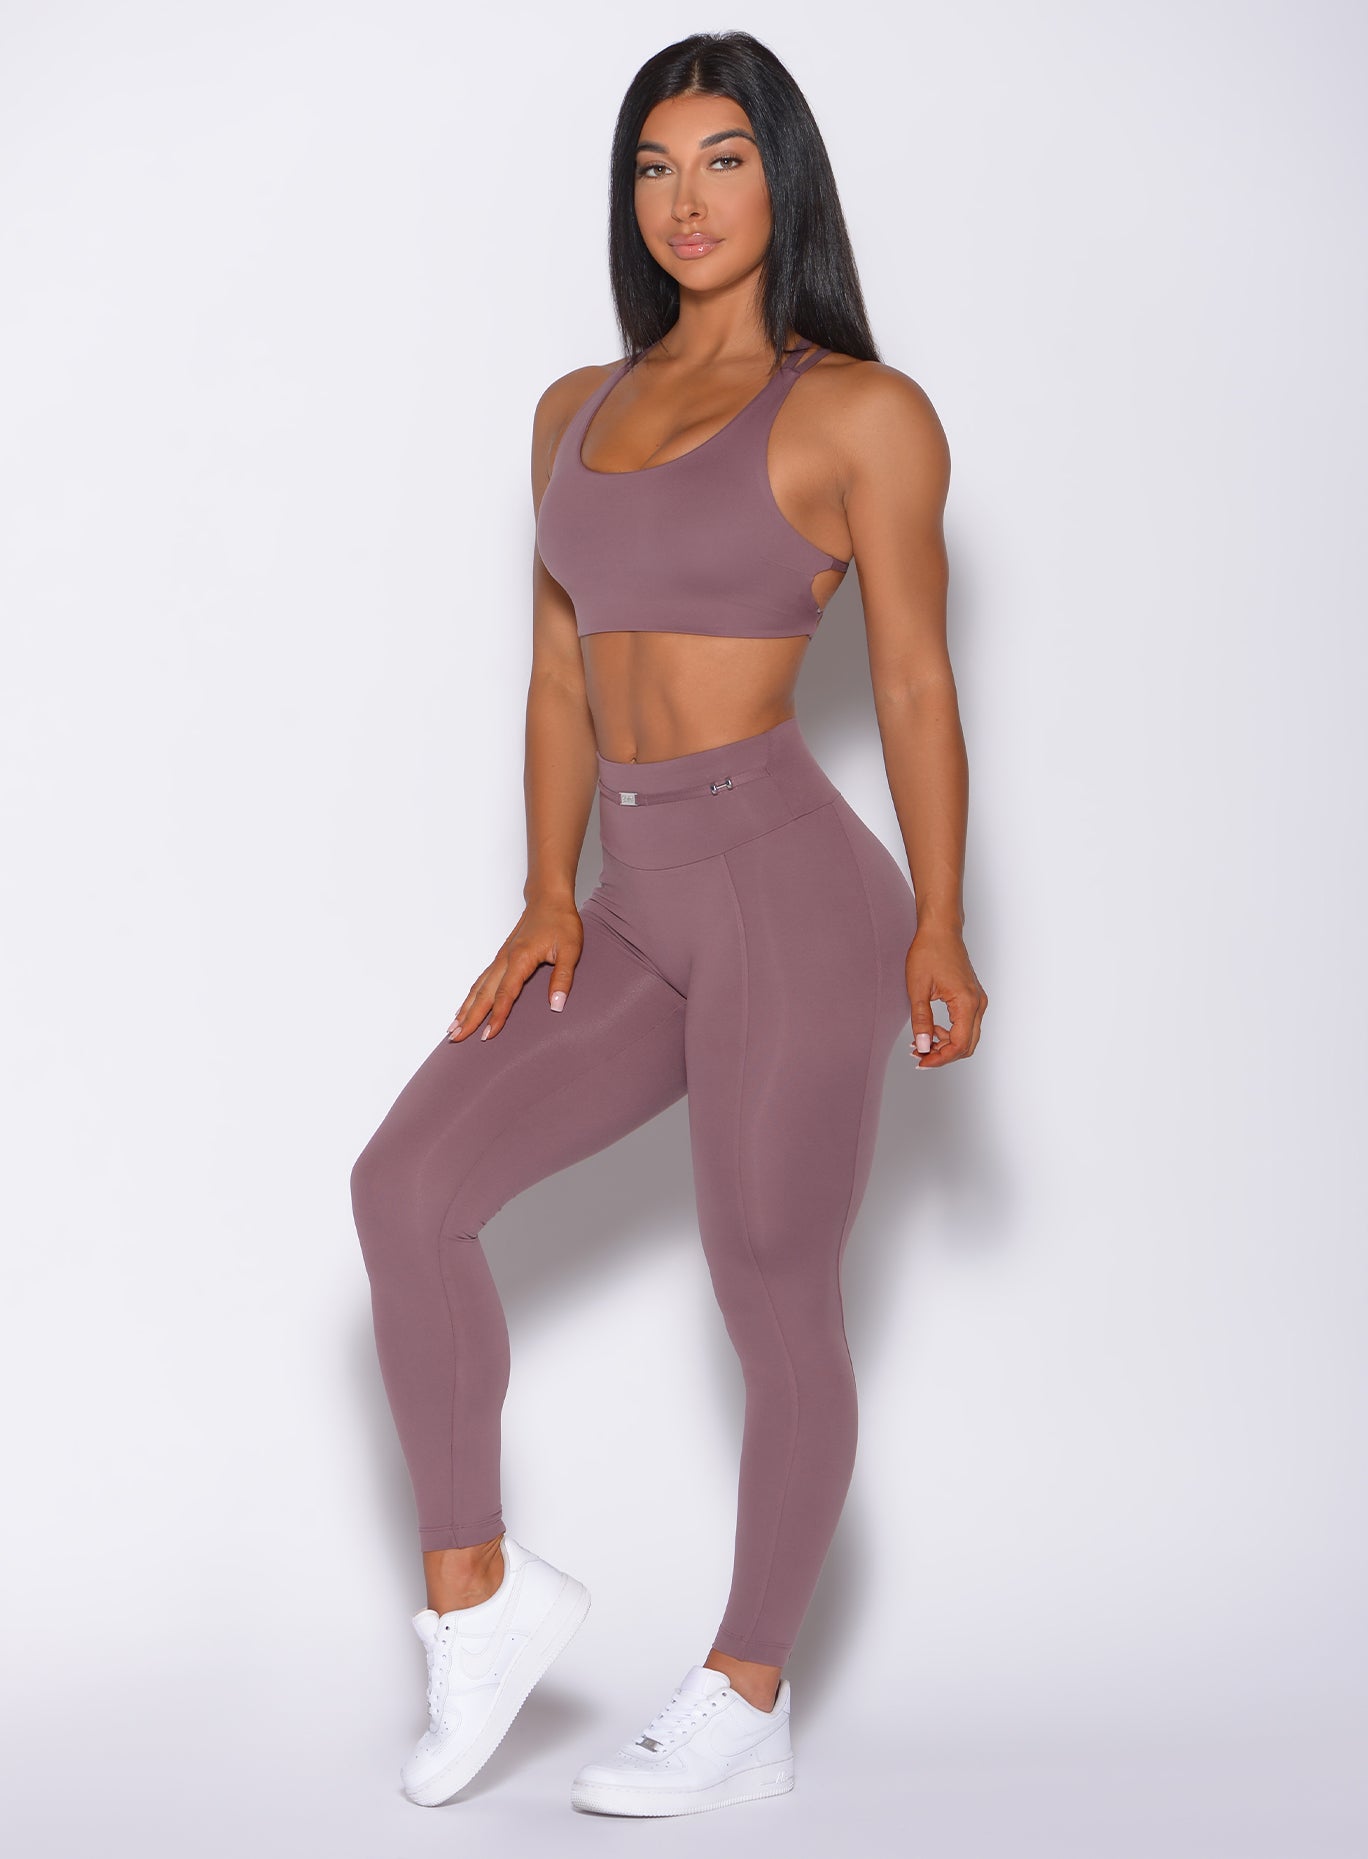 Front profile view of a model facing forward wearing our barbell legging in mauve color and a matching bra